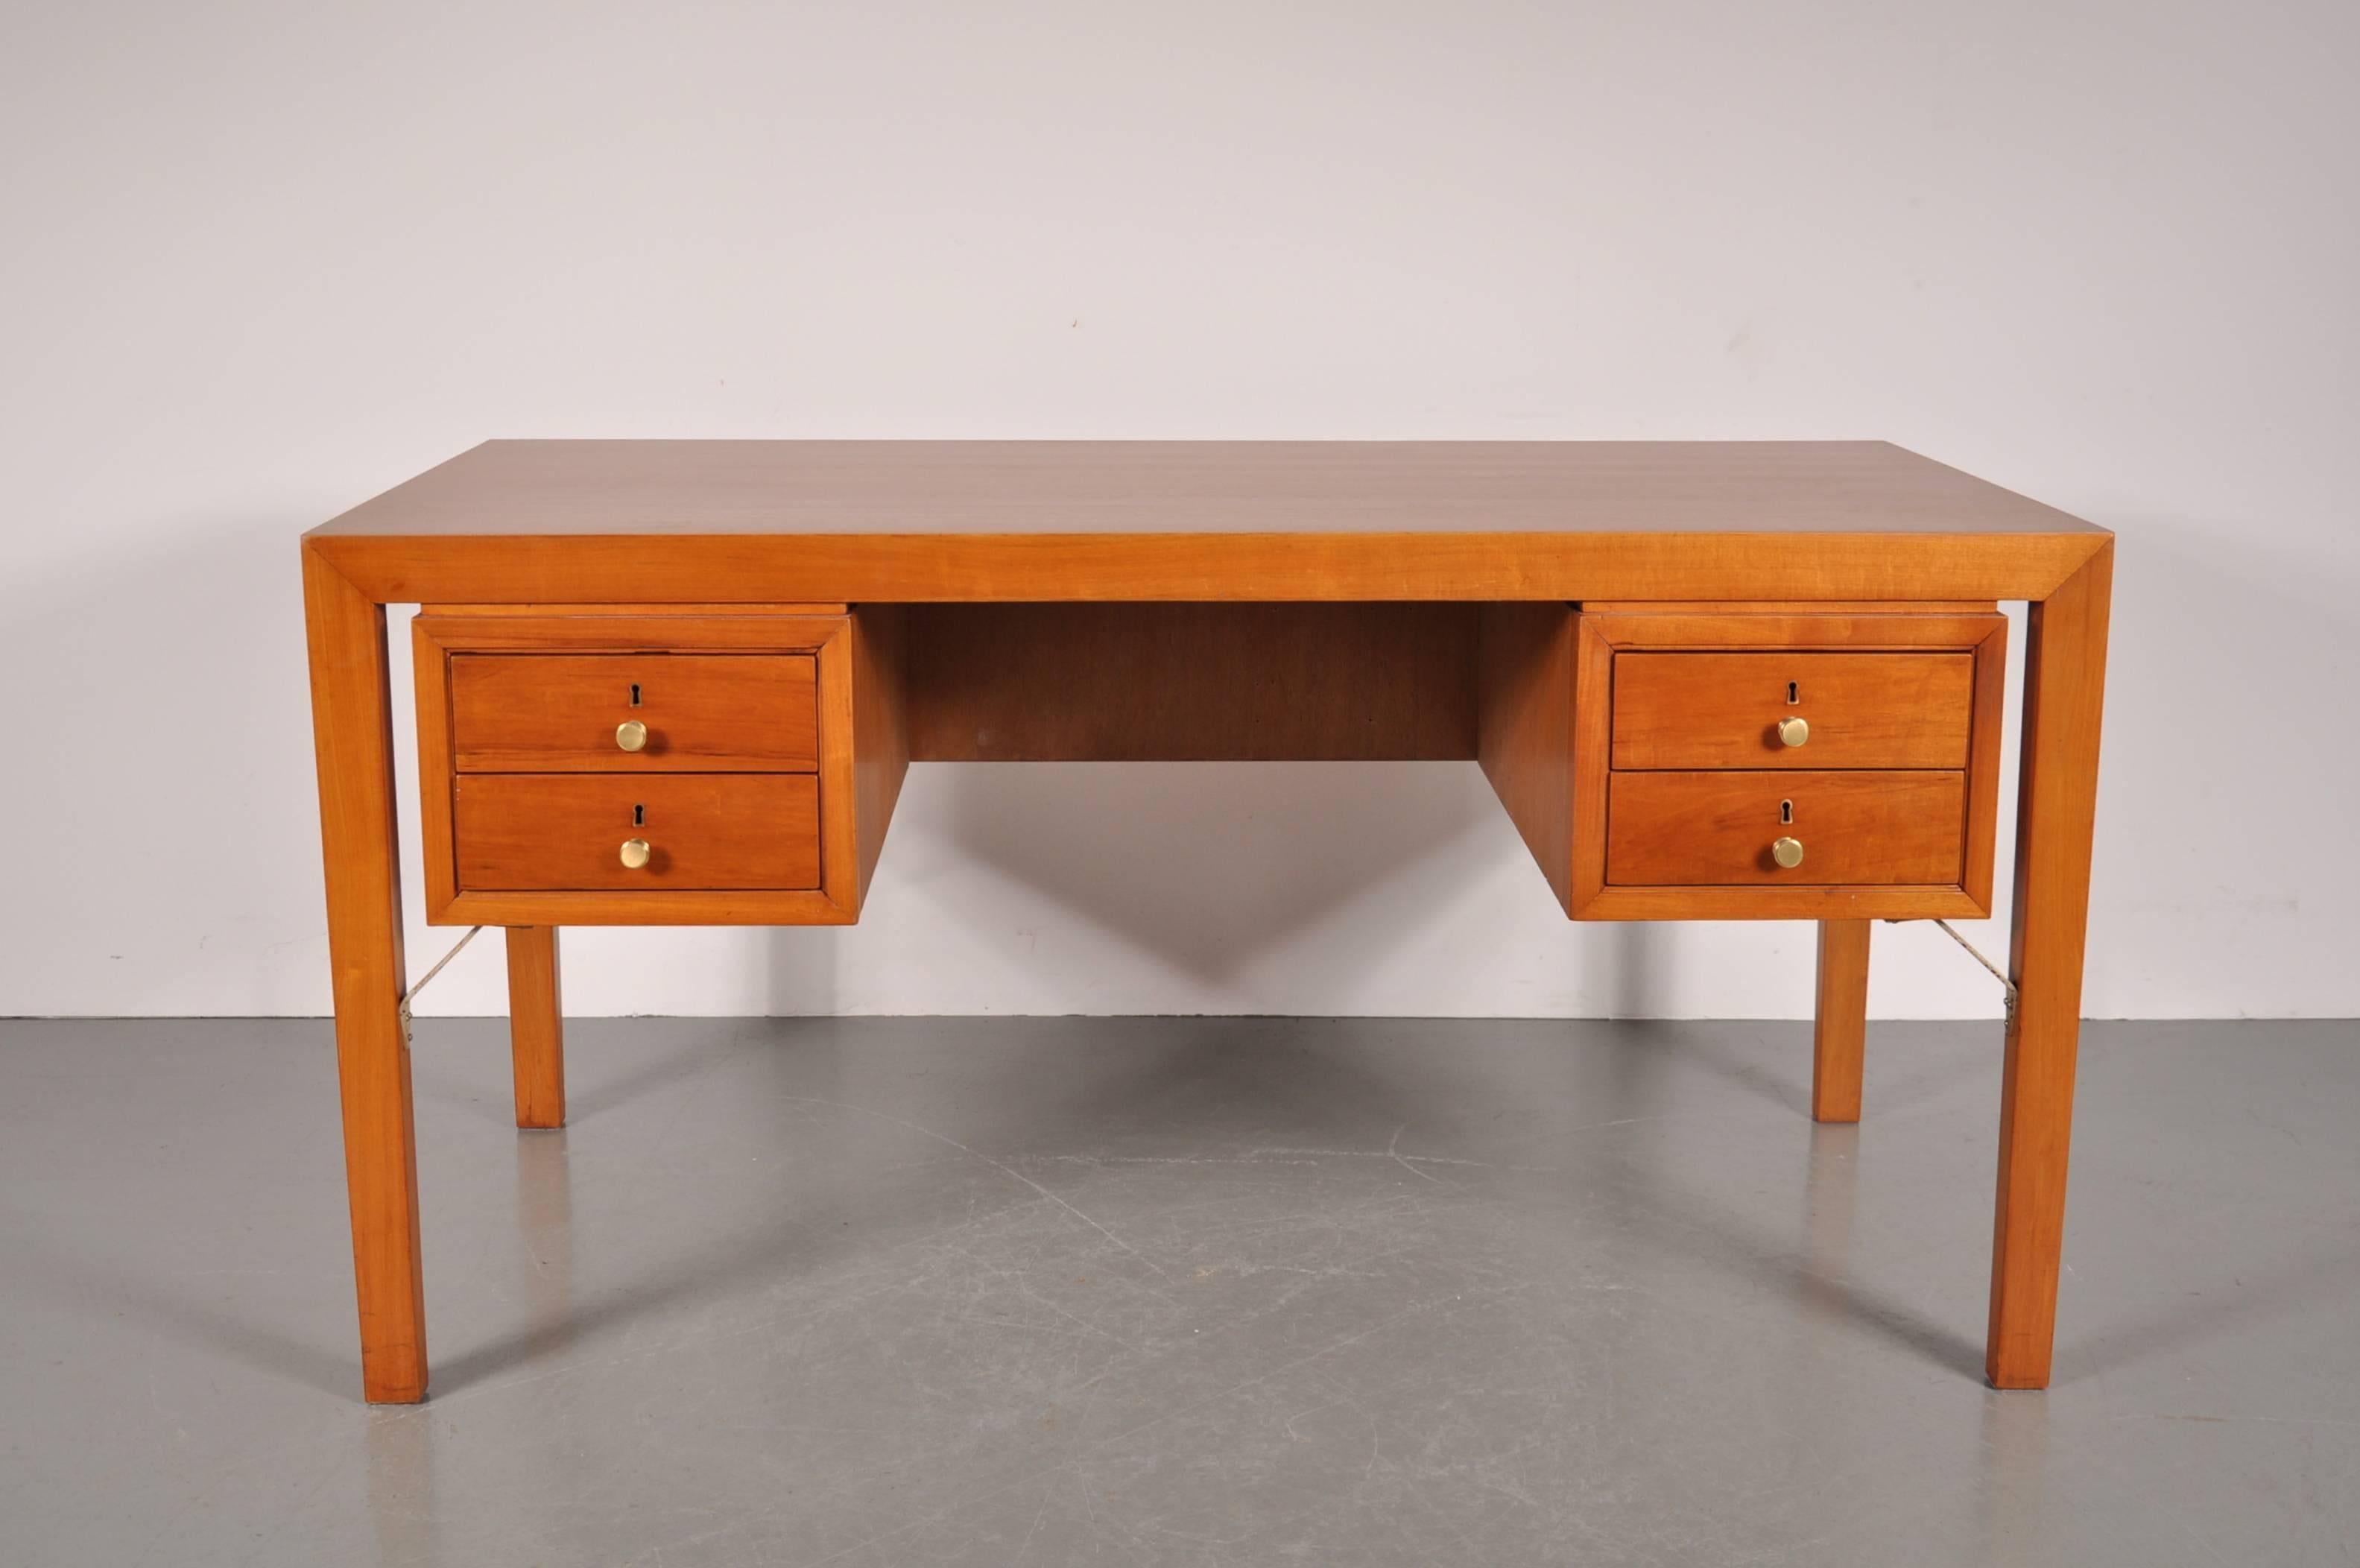 Unique desk manufactured in France around 1950.

This rare piece is made of the highest quality beech wood and has beautiful, well-crafted details on the sides and back, making this desk fit not only against a wall but also in the middle of a